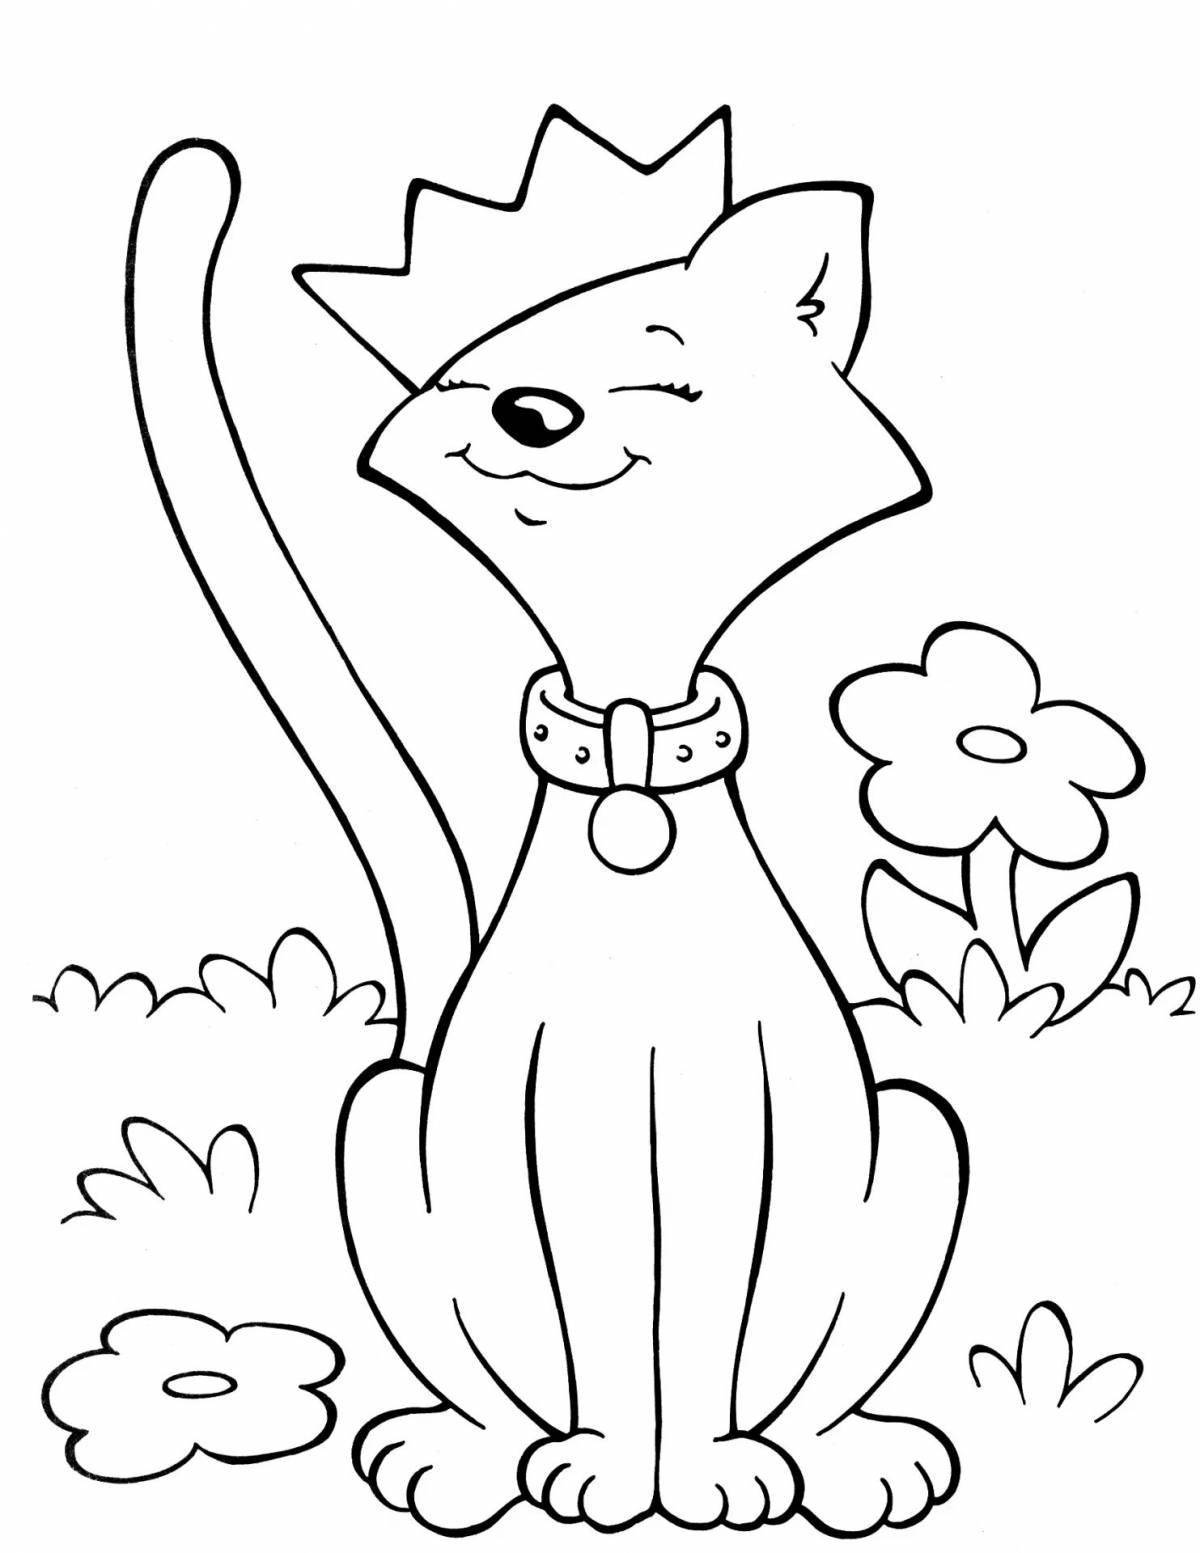 Coloring book decorated cat with a crown